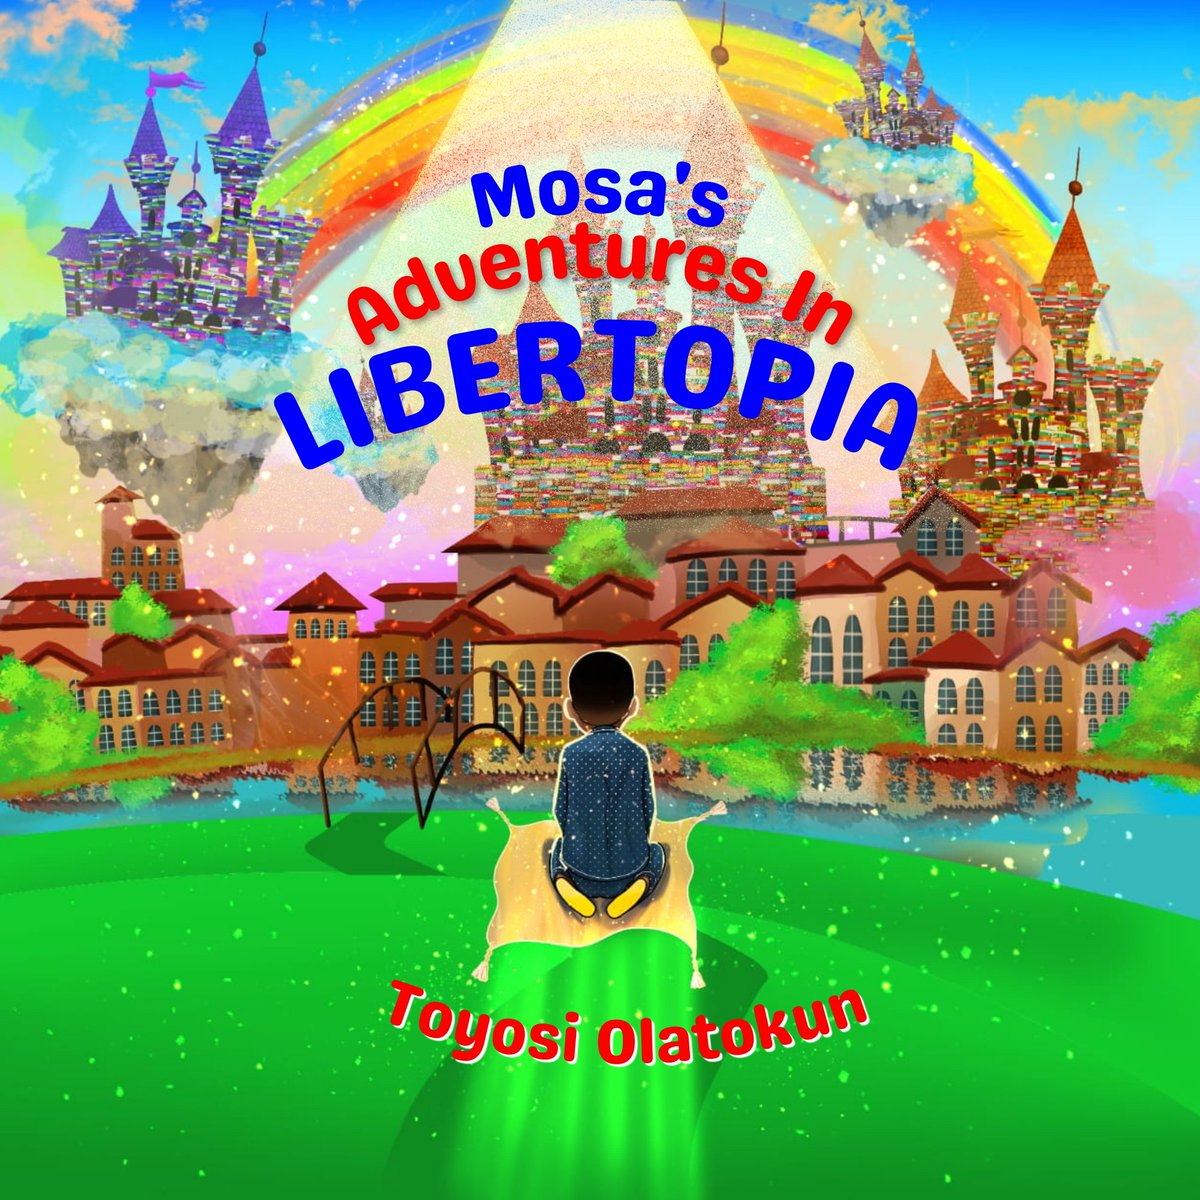 Whoop-whoop!

Here is the BOOK COVER reveal for our new children's book, Mosa's Adventures in Libertopia.

Coming out, in August!

#picturebook #CHILDRENSBOOK #WorldKidLit #AfricanKidLit